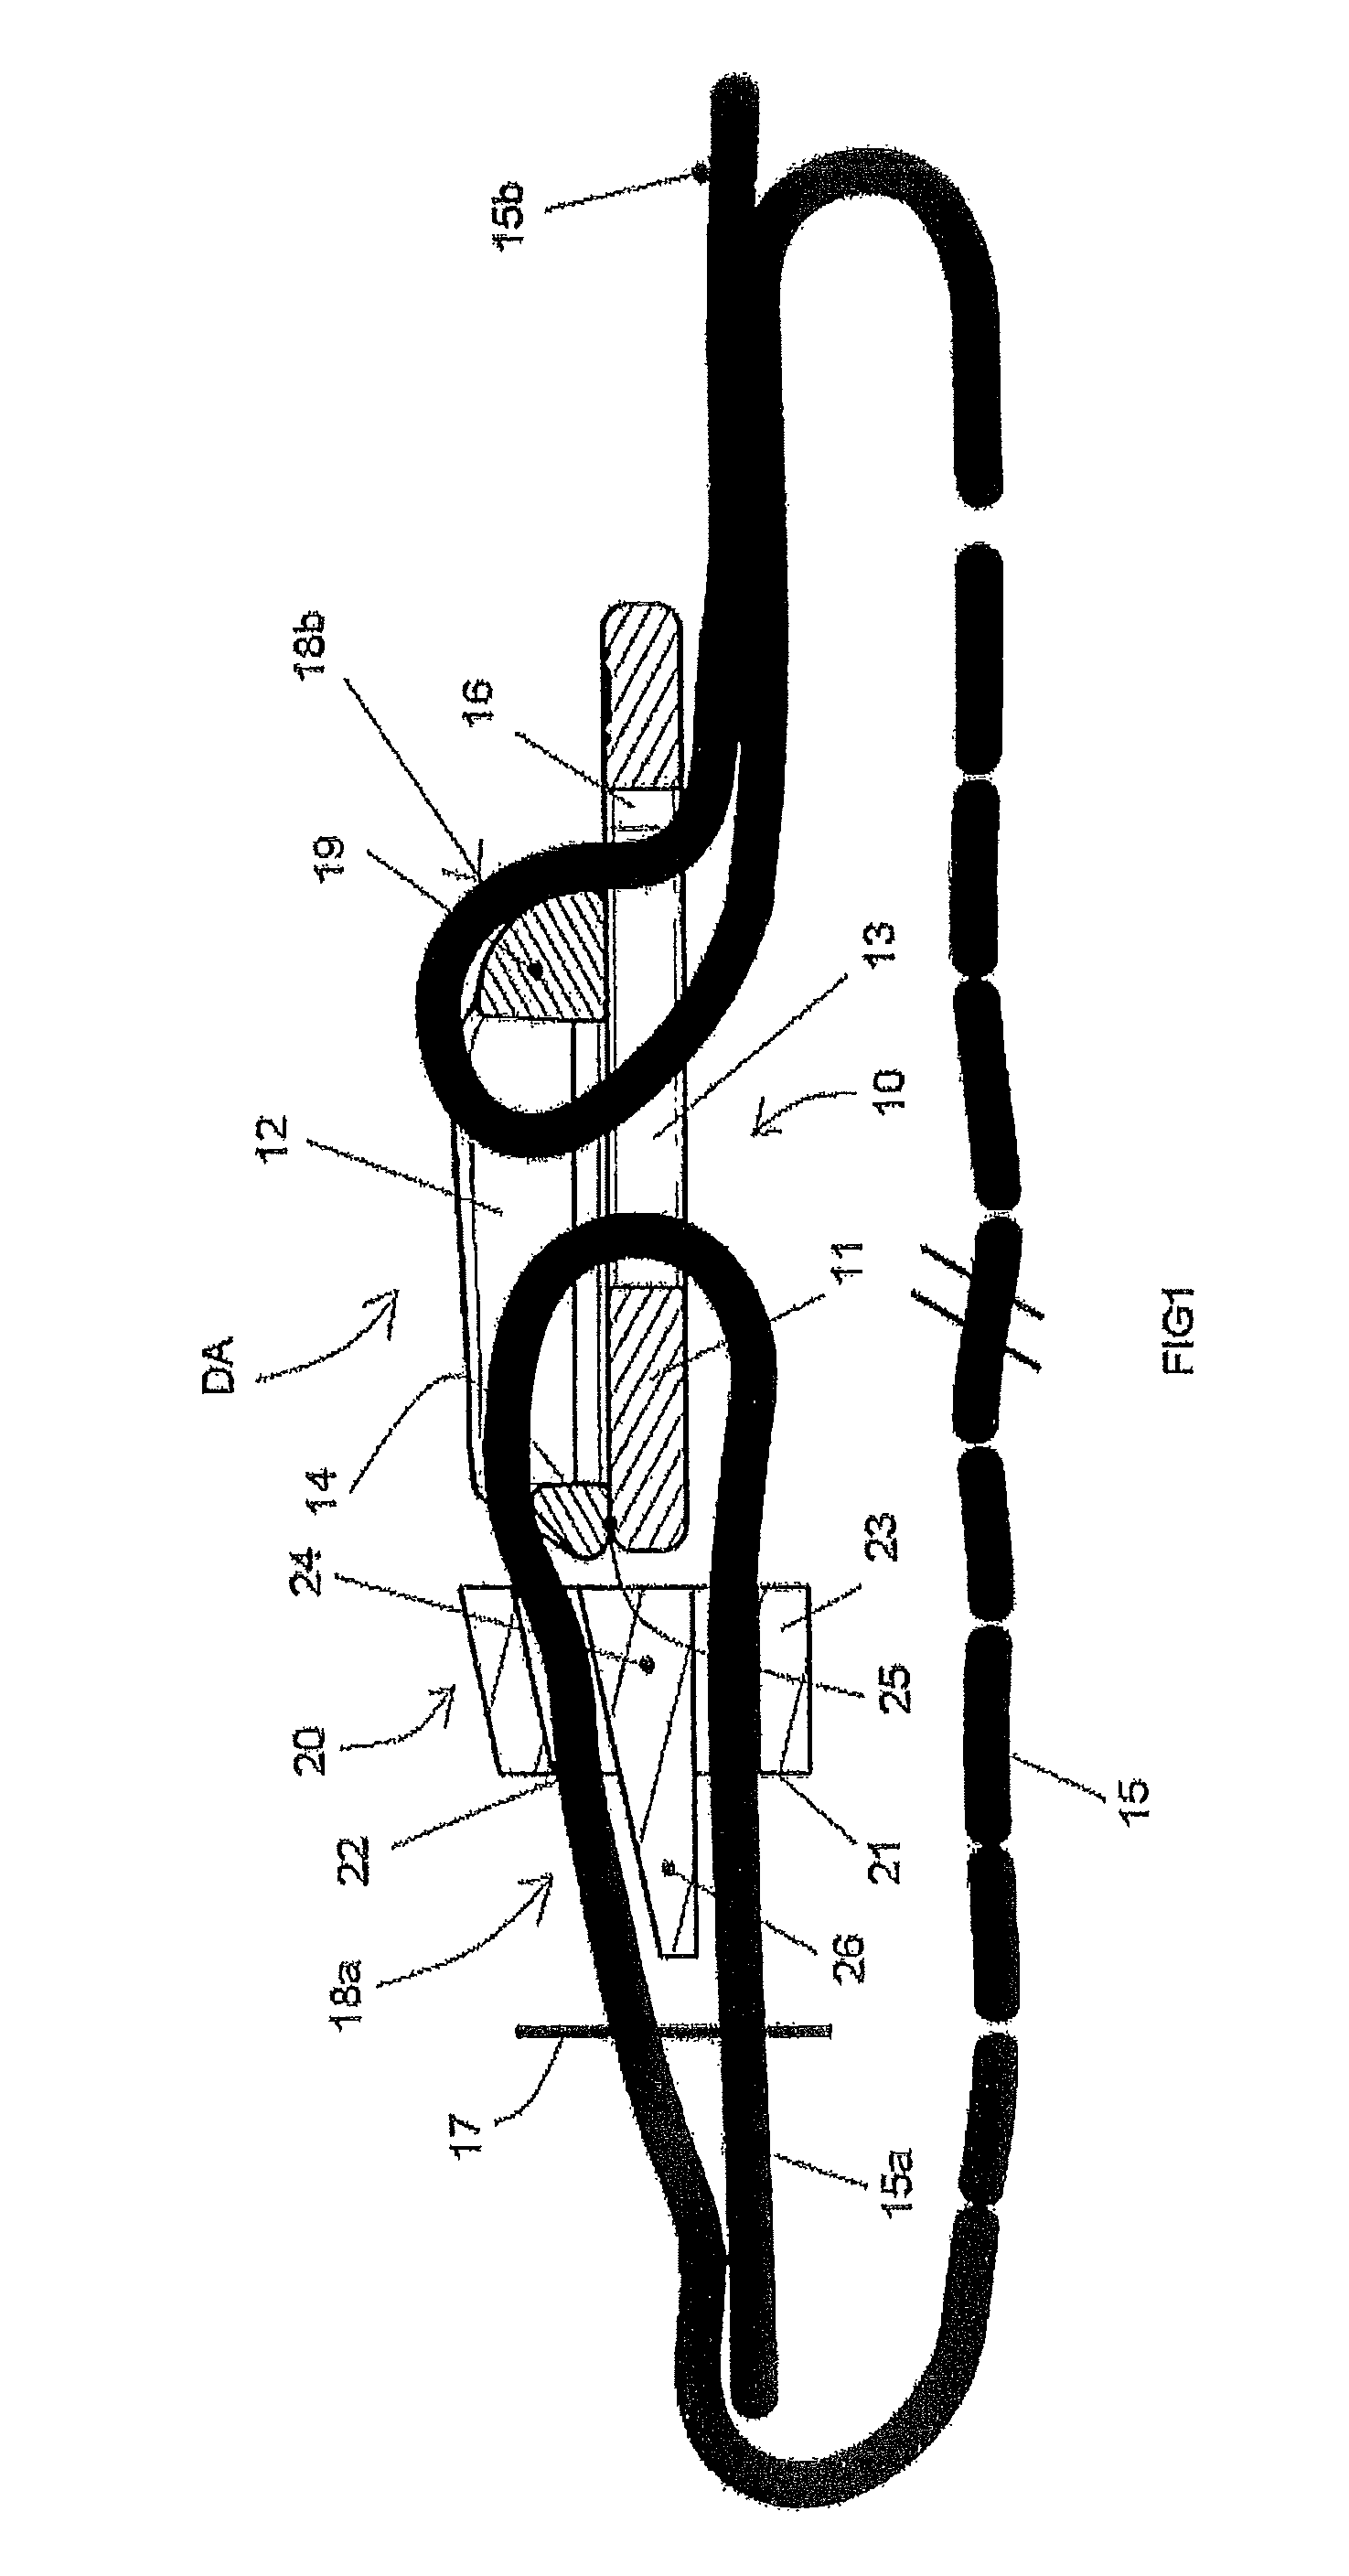 Buckle device for adjusting and clamping a strap